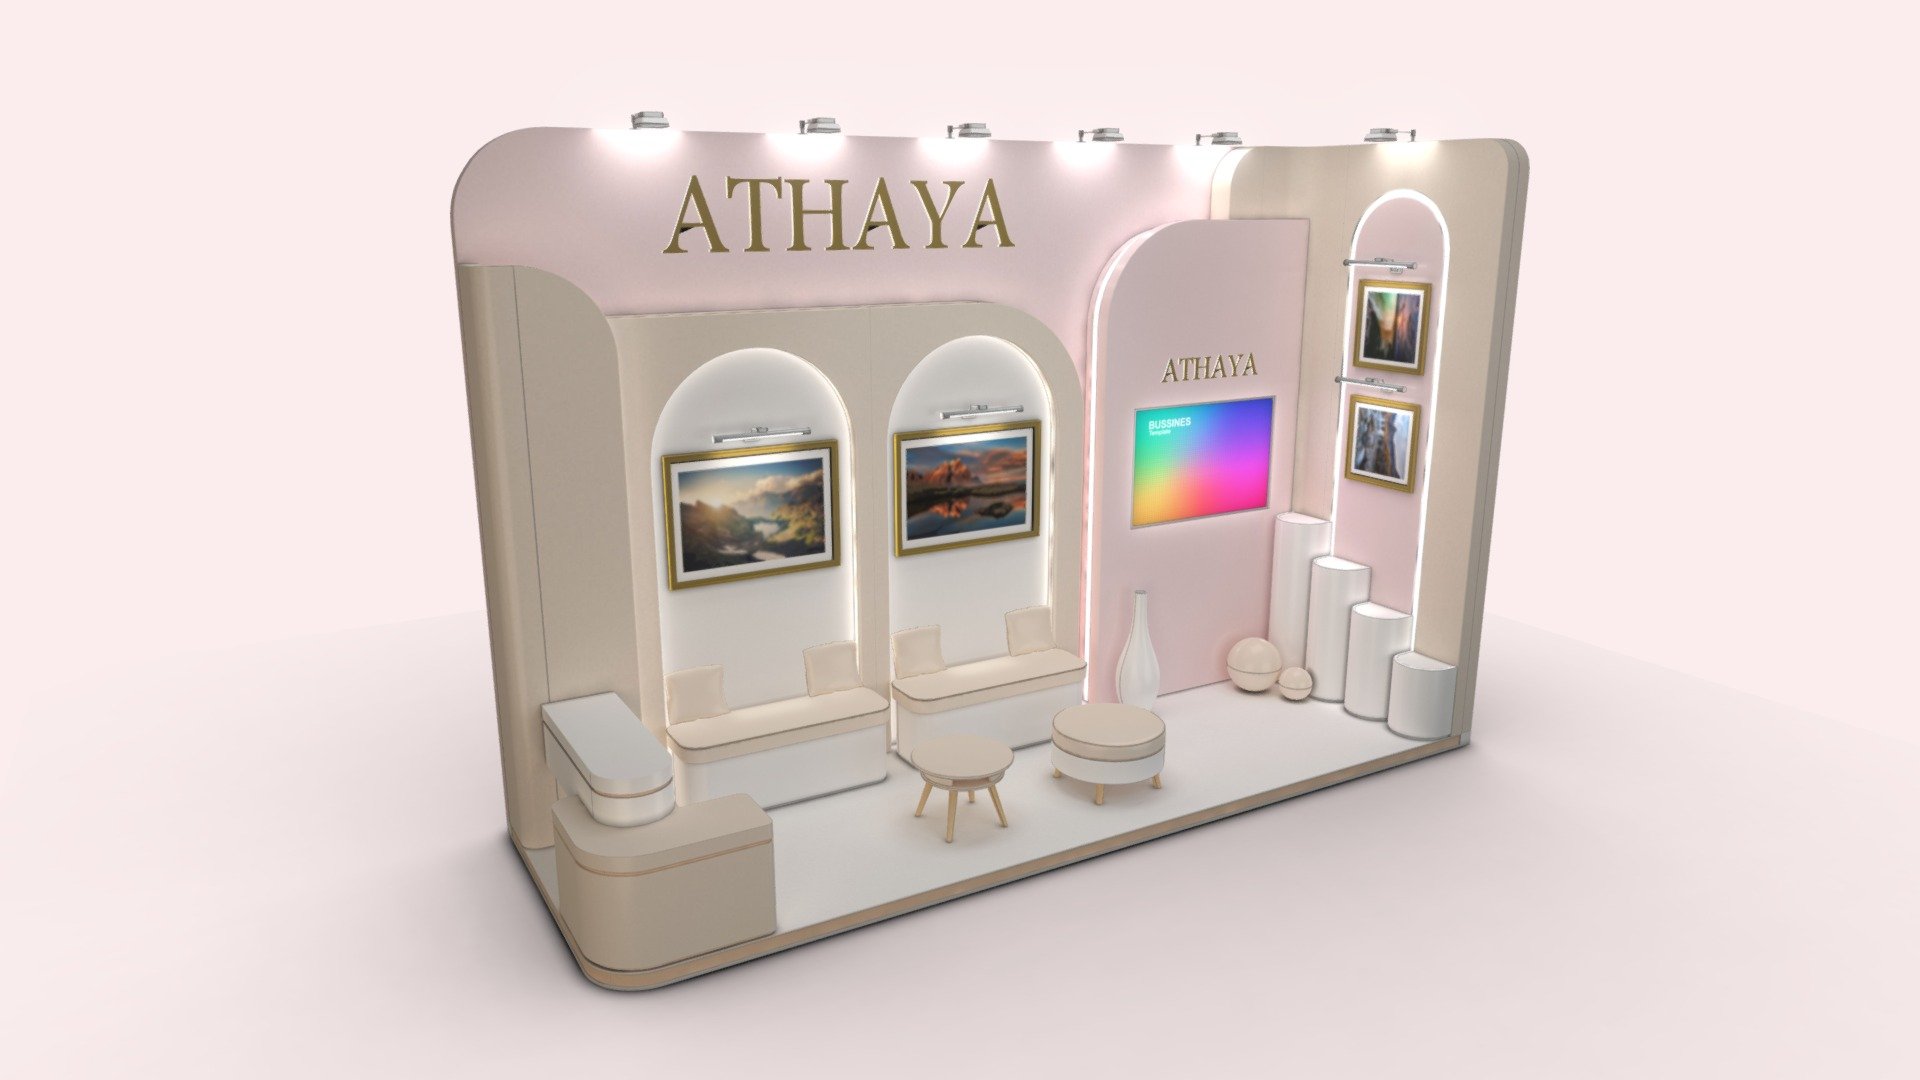 Exhibition - Stand / booth / stall  - Design

12 Sqm / 6x2m / 2 Exposed sides

Format: 

1. Autodesk 3Ds max 2020 / V ray 5

2. Autodesk 3Ds max 2017 / Default scanline

3. Obj Format





EXHIBITION STAND_2204_obj standard map




EXHIBITION STAND_2204_obj V ray complete map



4. Fbx format





EXHIBITION STAND_2204_fbx standard map




EXHIBITION STAND_2204_fbx V ray complete map



Unit: cm

thank you for visiting

If you are interested in other models, please visit my collection



EXHIBITION STAND 36 Sqm
https://sketchfab.com/fasih.lisan/collections/exhibition-stand-36-sqm-34b6419aa7ec4556b18d8a381c51db77

EXHIBITION STAND 18 Sqm
https://sketchfab.com/fasih.lisan/collections/exhibition-stand-18-sqm-9a22add1012e4c36961b6e1db26a0280

EXHIBITION STAND 9 sqm
https://sketchfab.com/fasih.lisan/collections/exhibition-stand-9-sqm-2afc738a25634768ba5335da876876f2 - EXHIBITION STAND 2204 12 Sqm - Buy Royalty Free 3D model by fasih.lisan 3d model